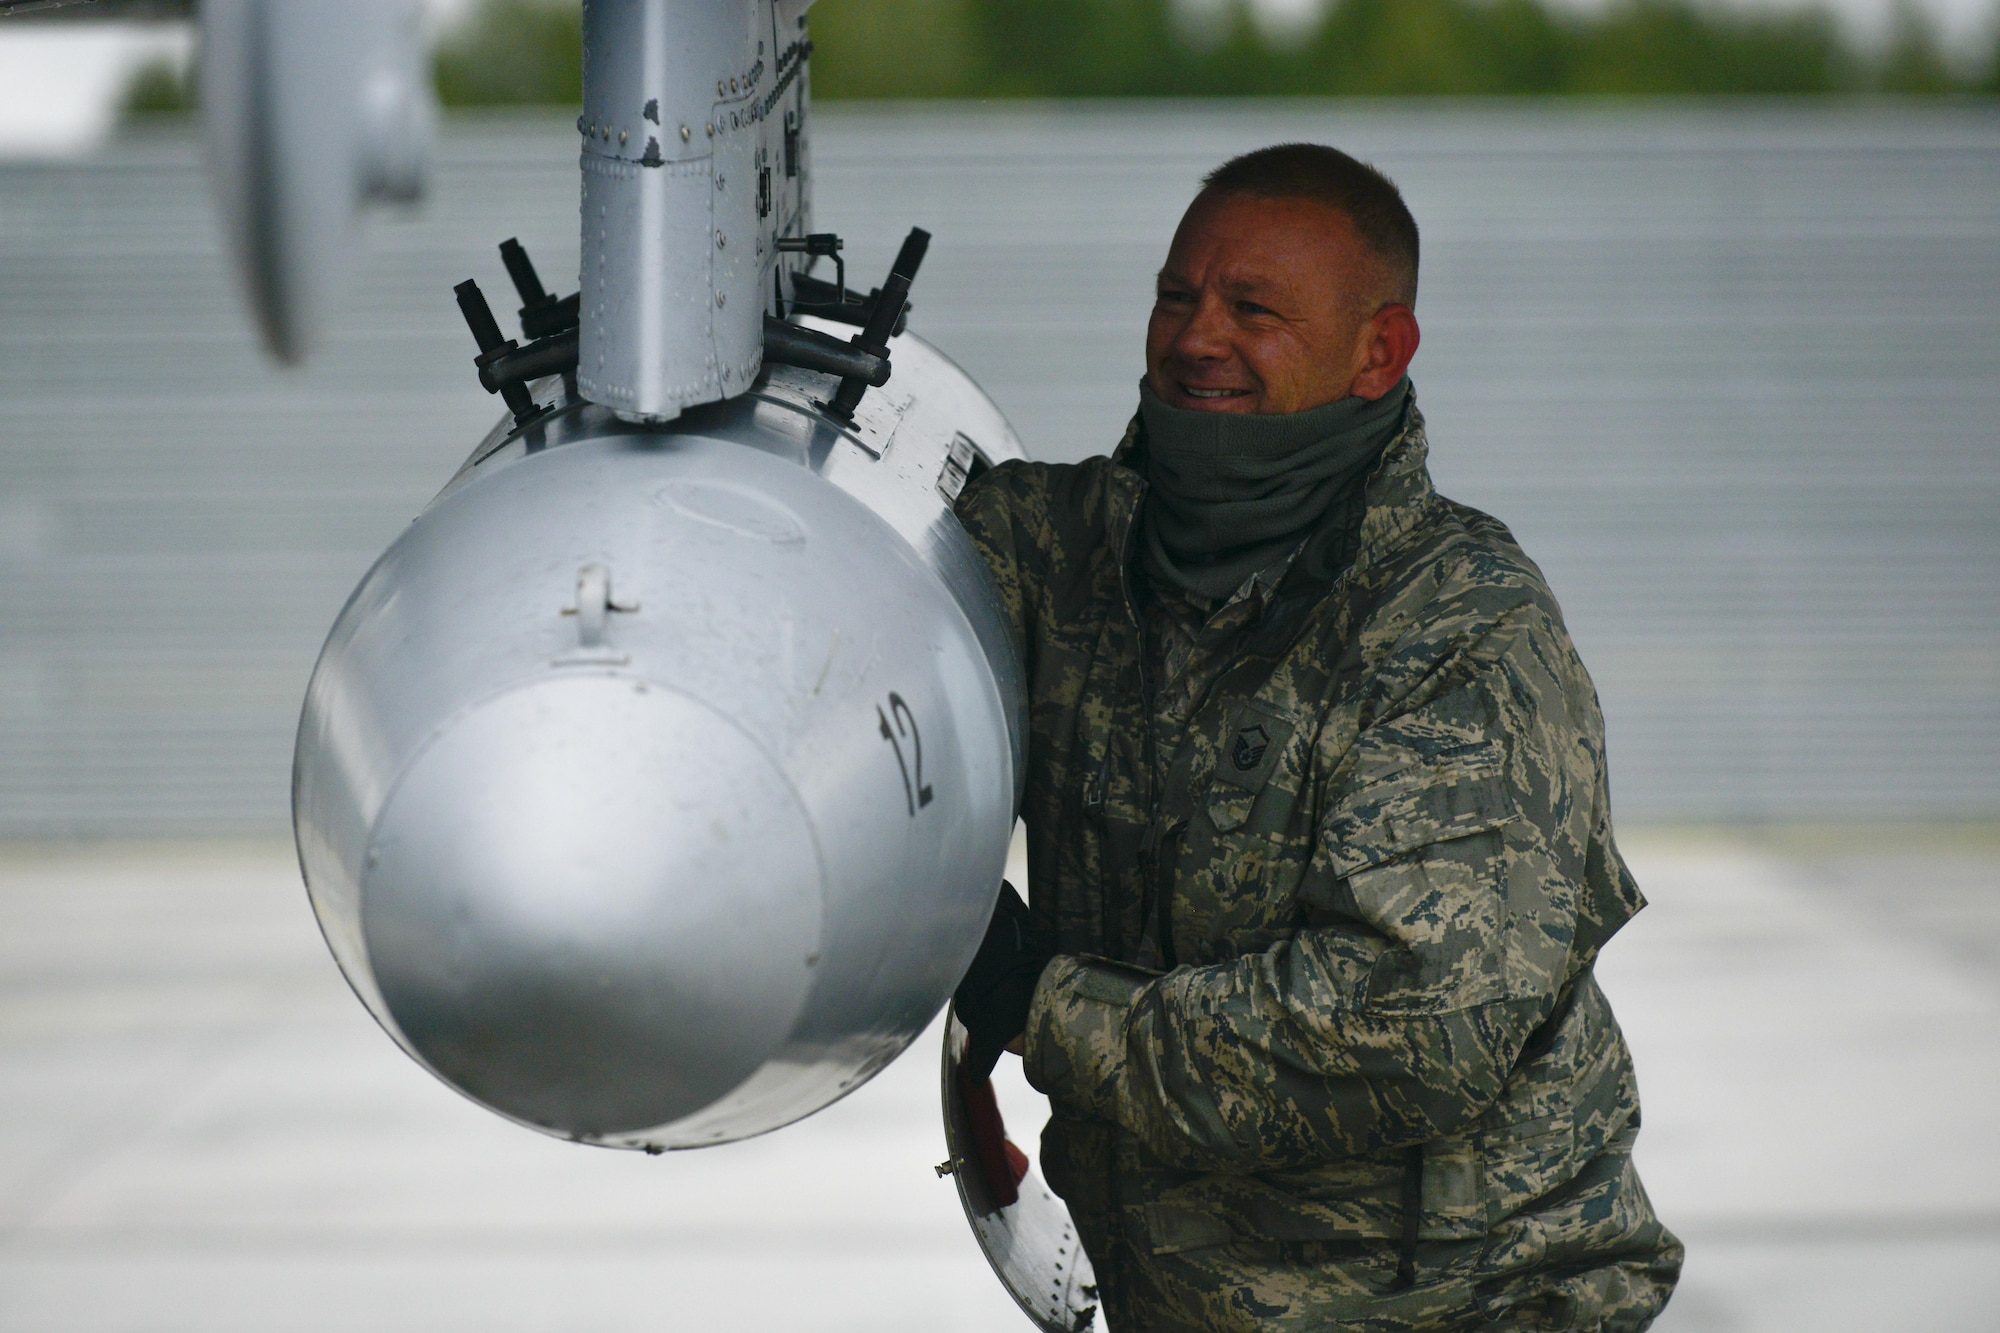 U.S. Air Force Master Sgt. Chris Asselin, 127th Aircraft Maintenance Squadron flight chief, unloads equipment from an A-10C Thunderbolt II at Lielvarde Air Base, Latvia June 11, 2016.  U.S. armed forces and Latvian airmen will participate in Saber Strike 16; a long-standing, U.S. Joint Chiefs of Staff-directed, U.S. Army Europe-led cooperative-training exercise taking place throughout Estonia, Latvia and Lithuania. (U.S. Air Force photo/Senior Airman Nicole Keim)